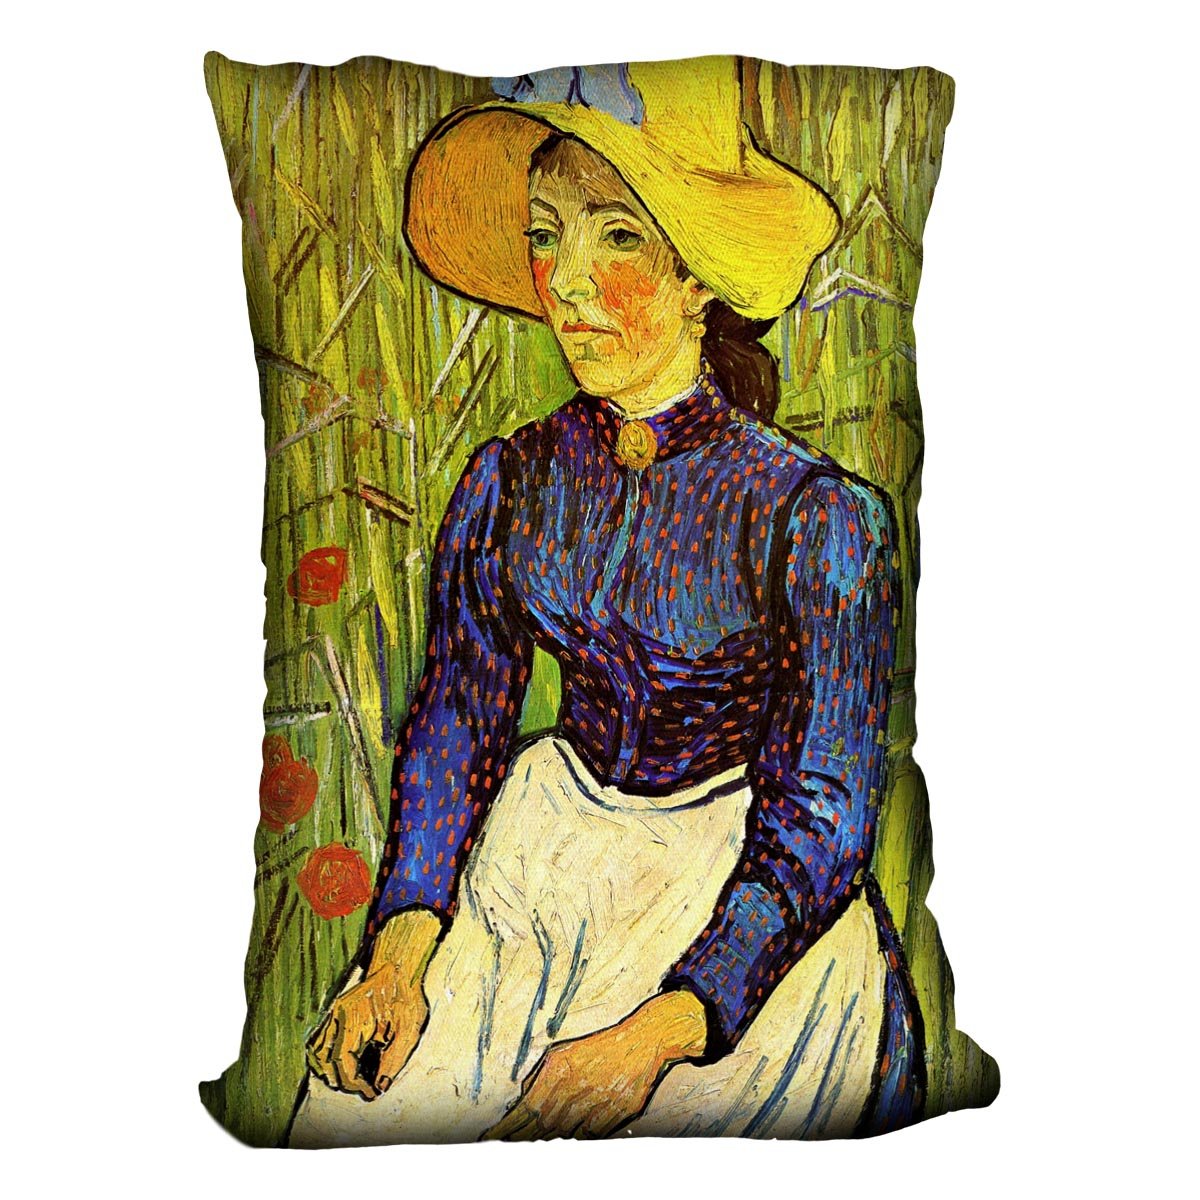 Young Peasant Woman with Straw Hat Sitting in the Wheat by Van Gogh Throw Pillow